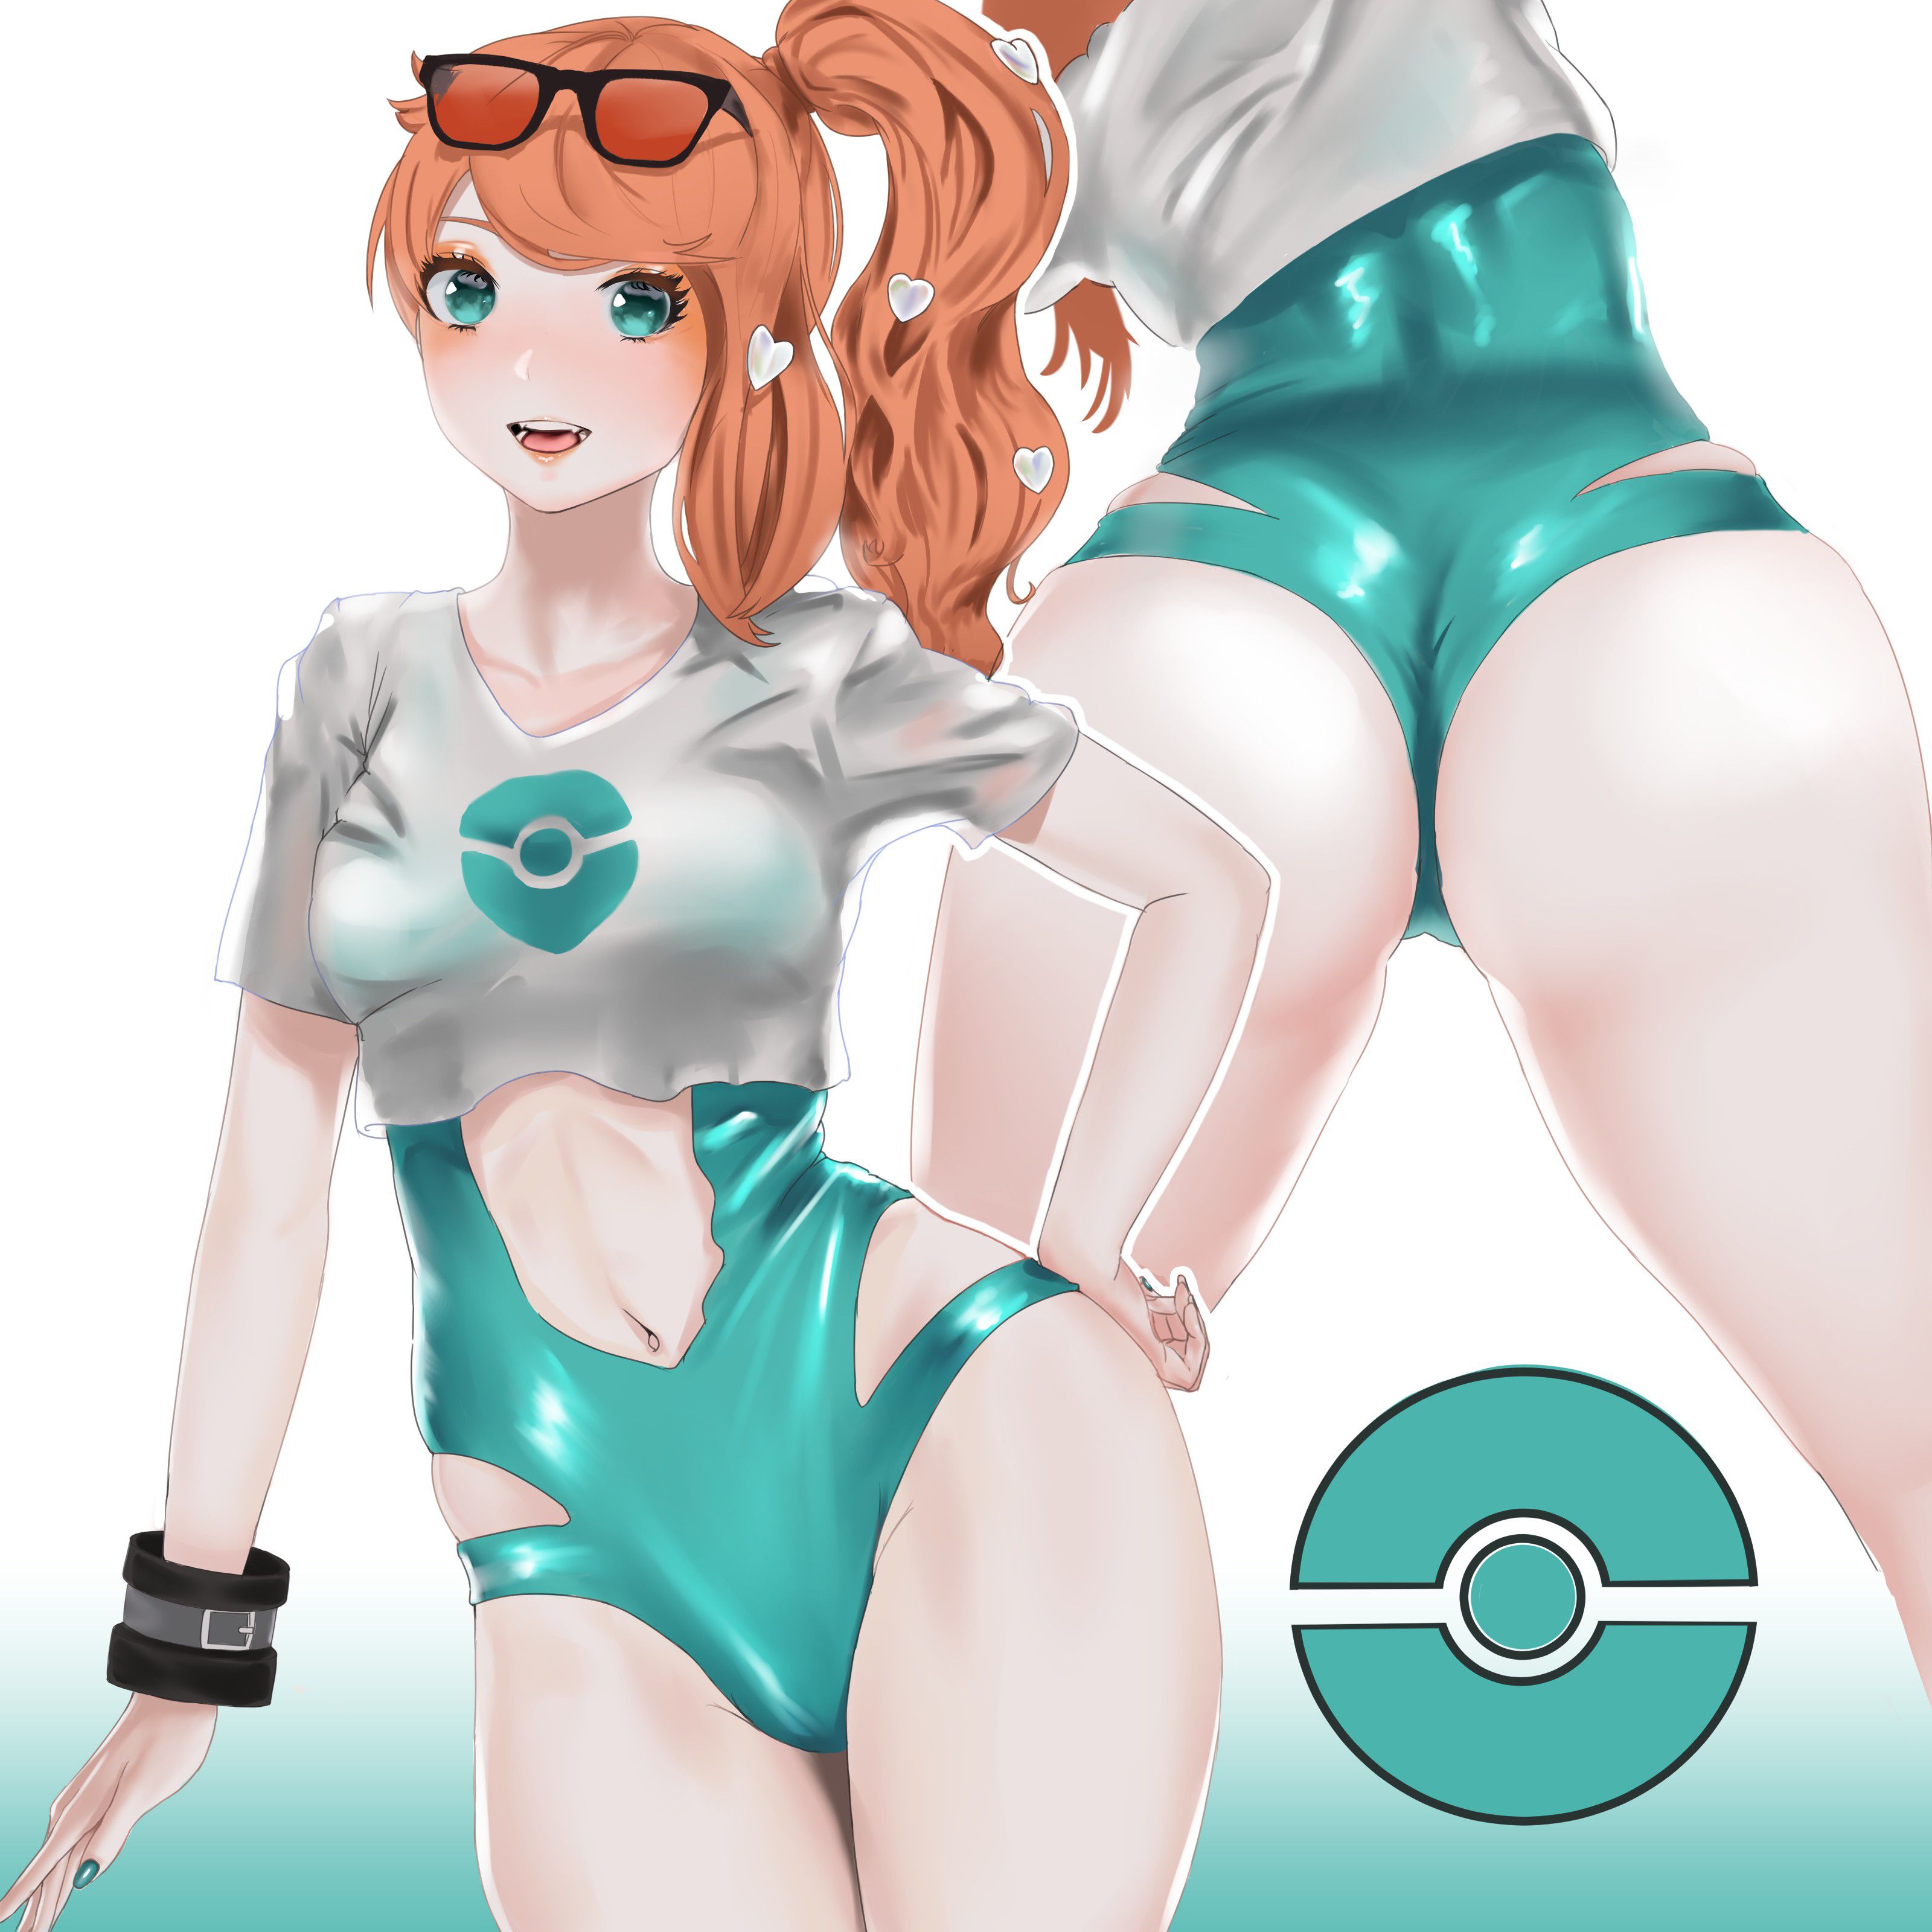 【2nd】Sonia-chan's Erotic Image of Pokemon Part 2 12